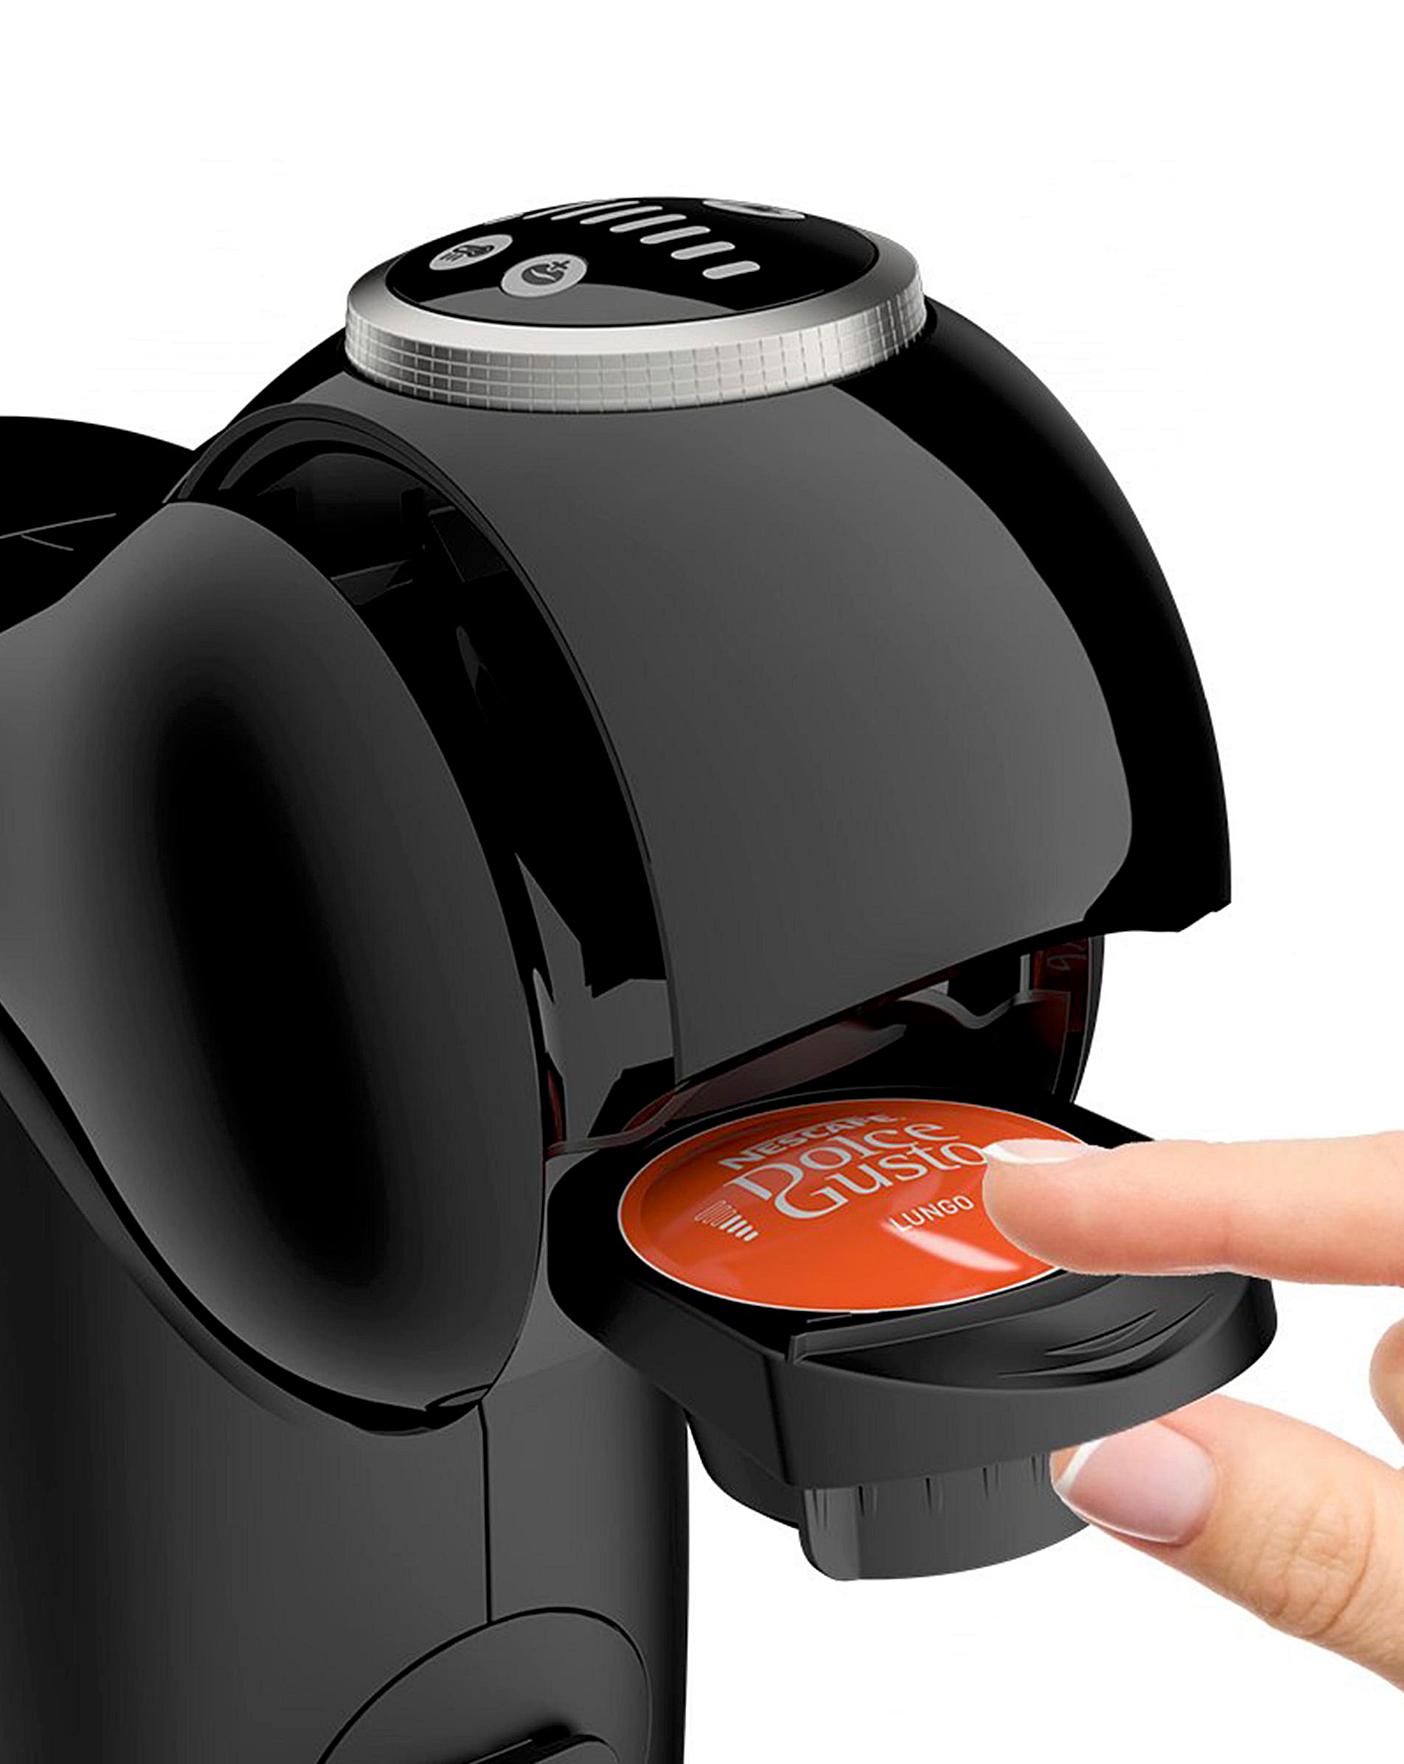 Krups Dolce gusto Genio s Plus kp340. Dolce gusto Genio s Plus. Dolce gusto Krups Genio s Plus. Нескафе Дольче густо kp340. Кофемашины dolce gusto genio